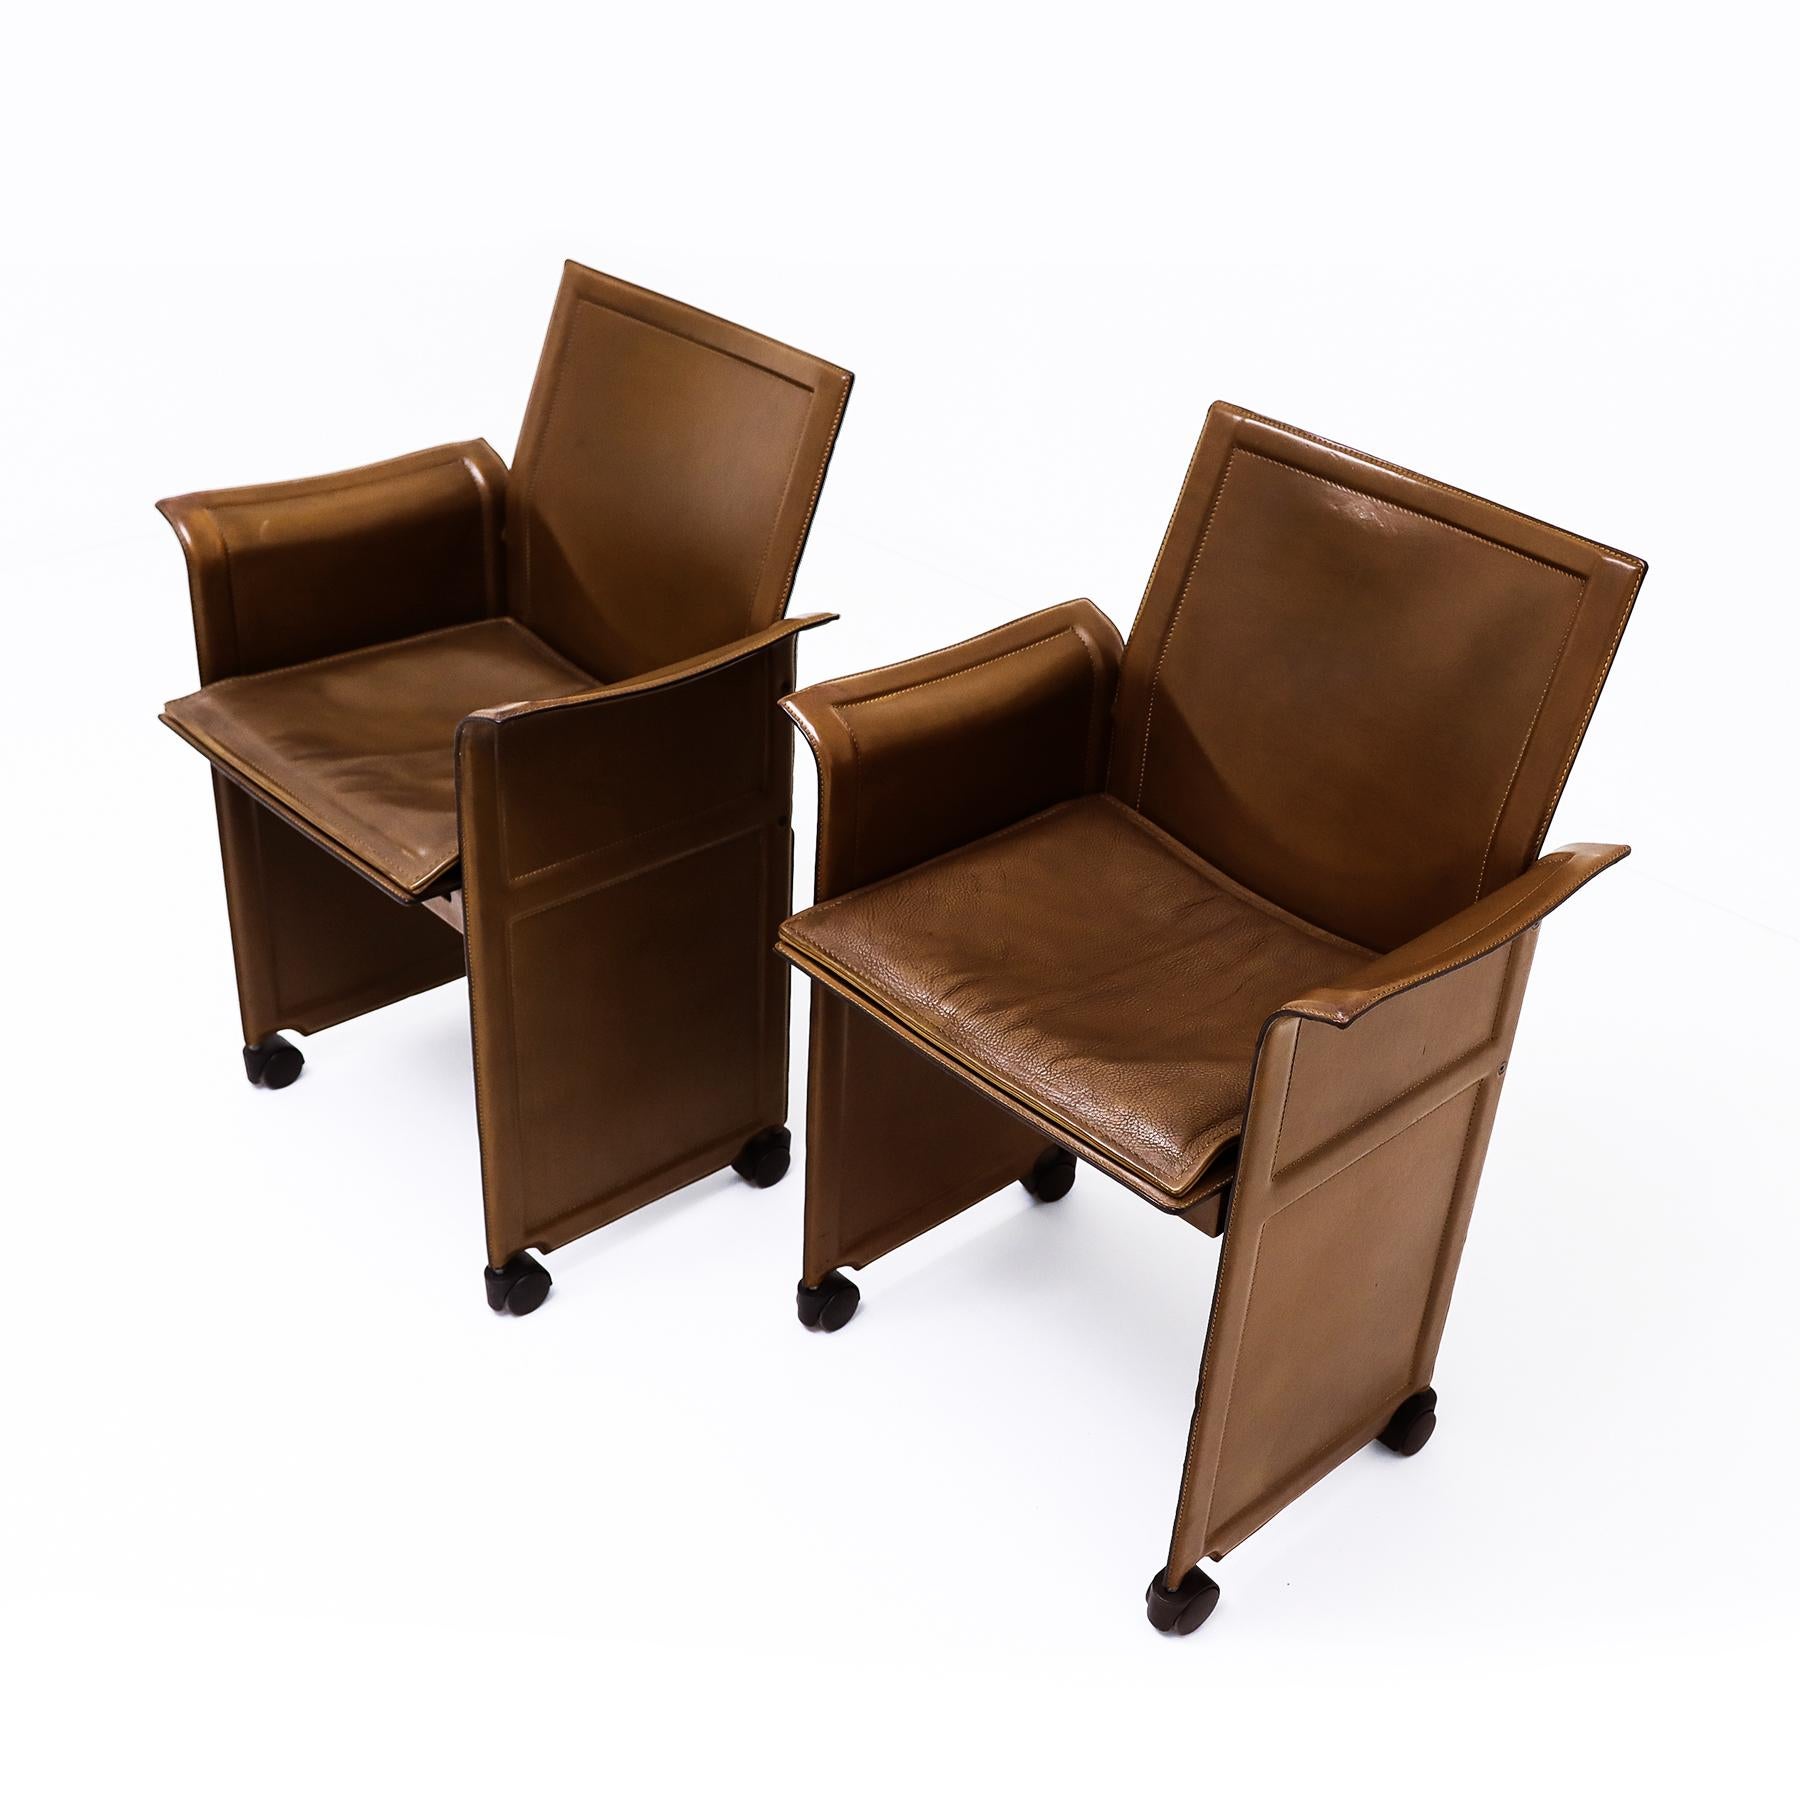 Vintage Italian leather Korium armchairs by Tito Agnoli for Matteo Grassi In Good Condition For Sale In Highclere, Newbury